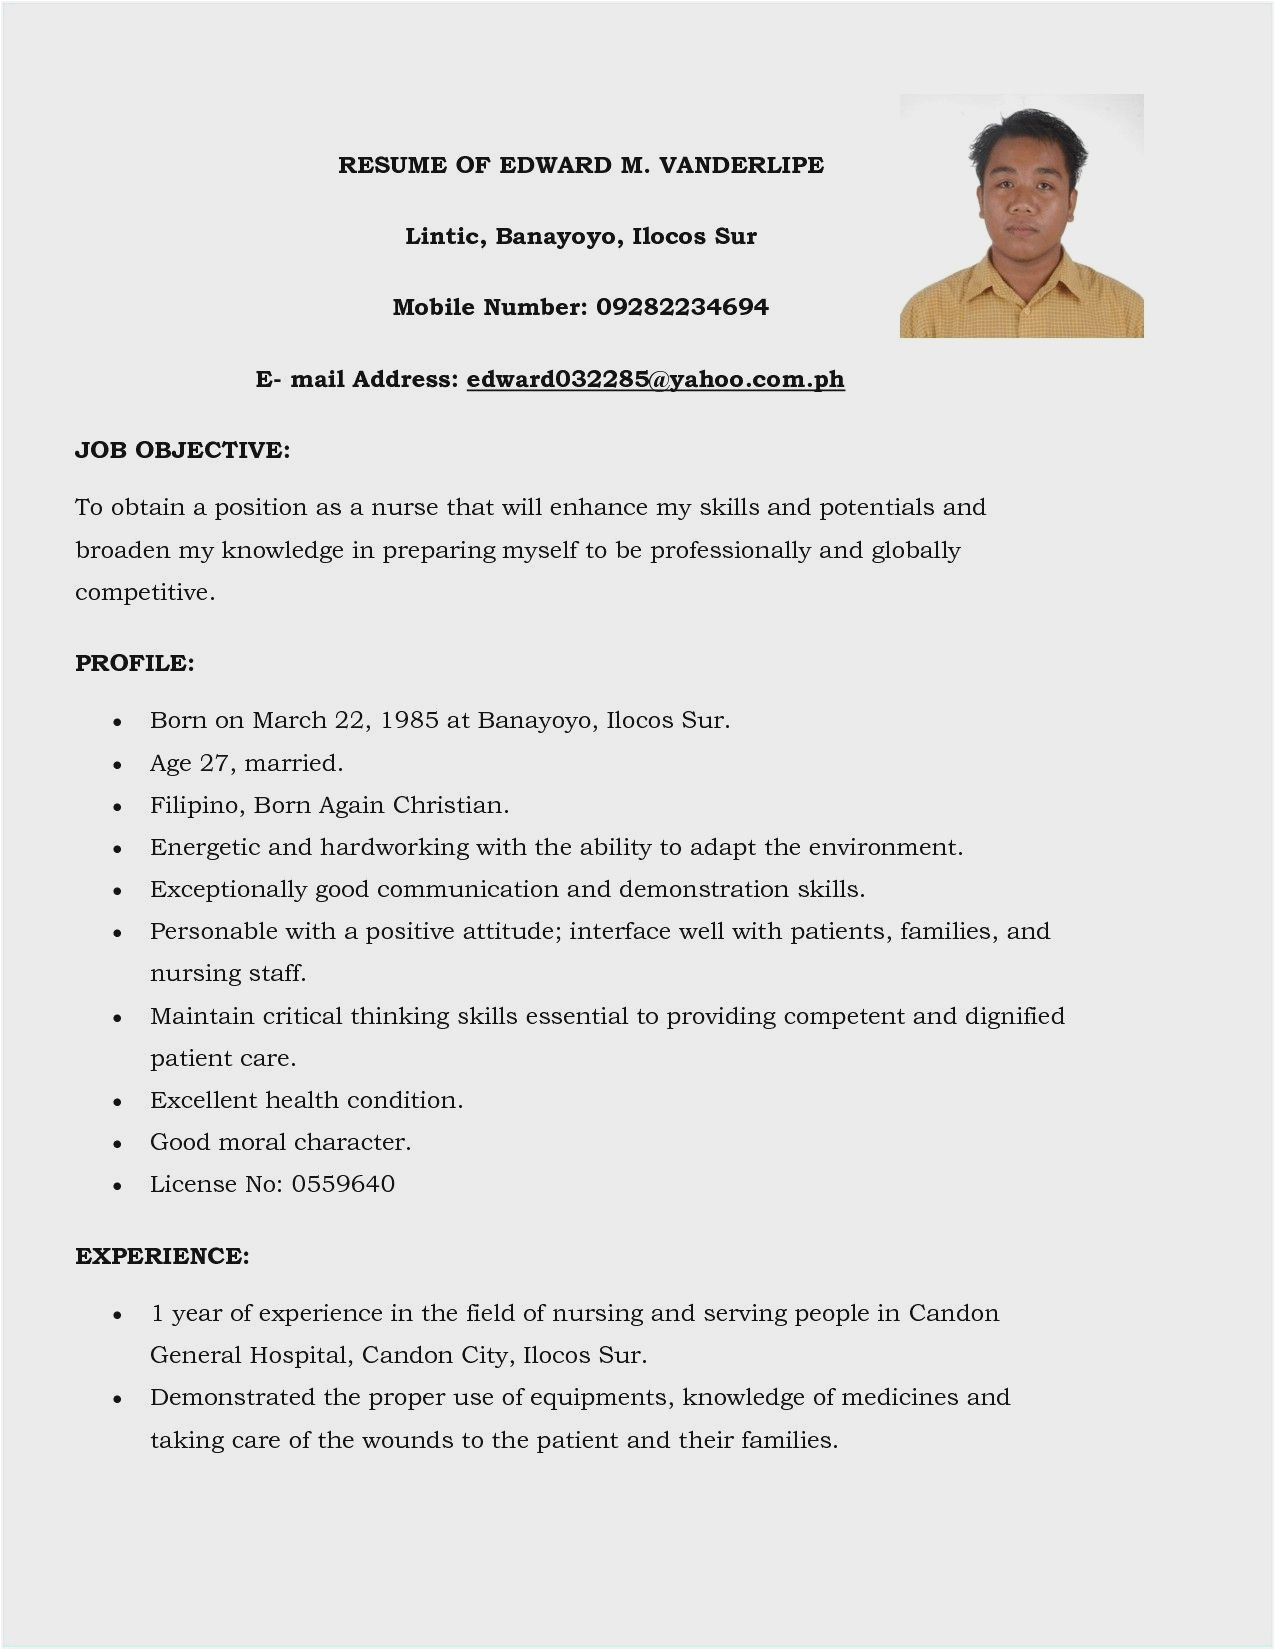 resume with picture philippines